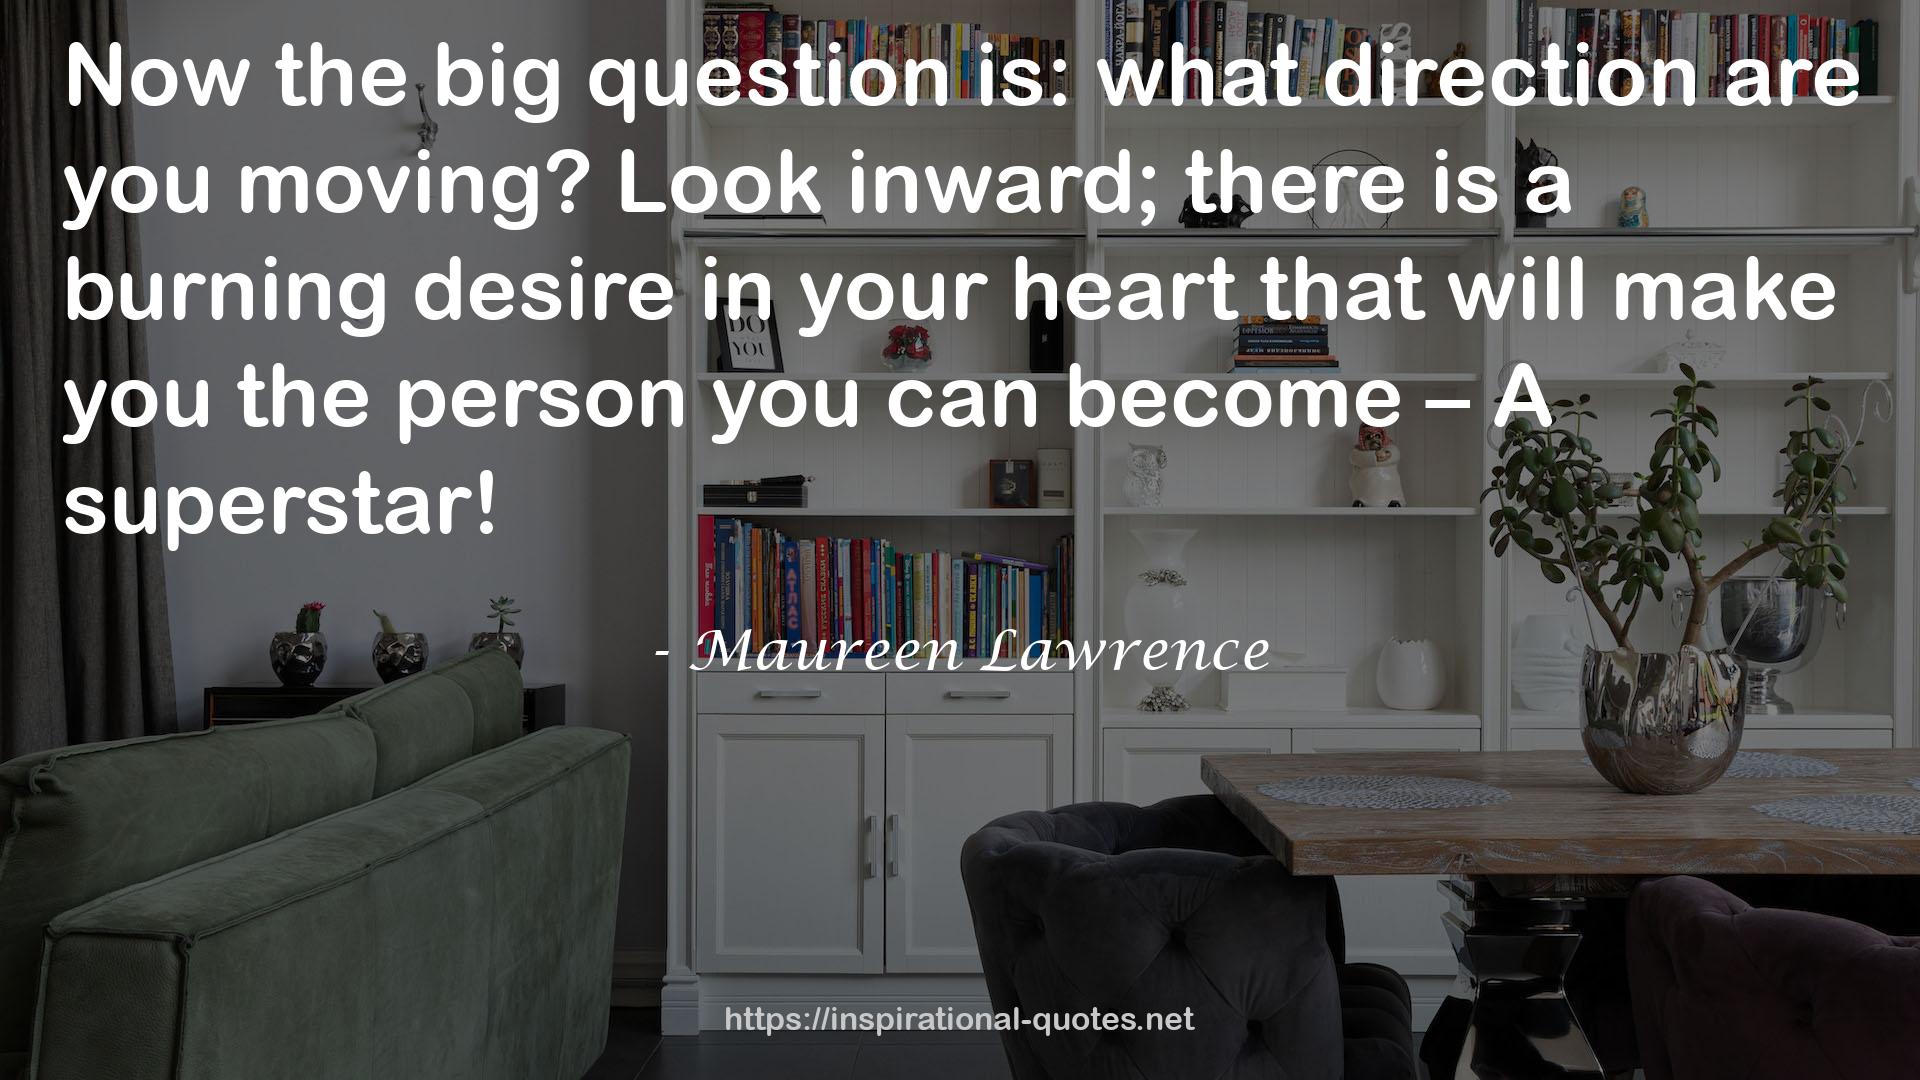 Maureen Lawrence QUOTES